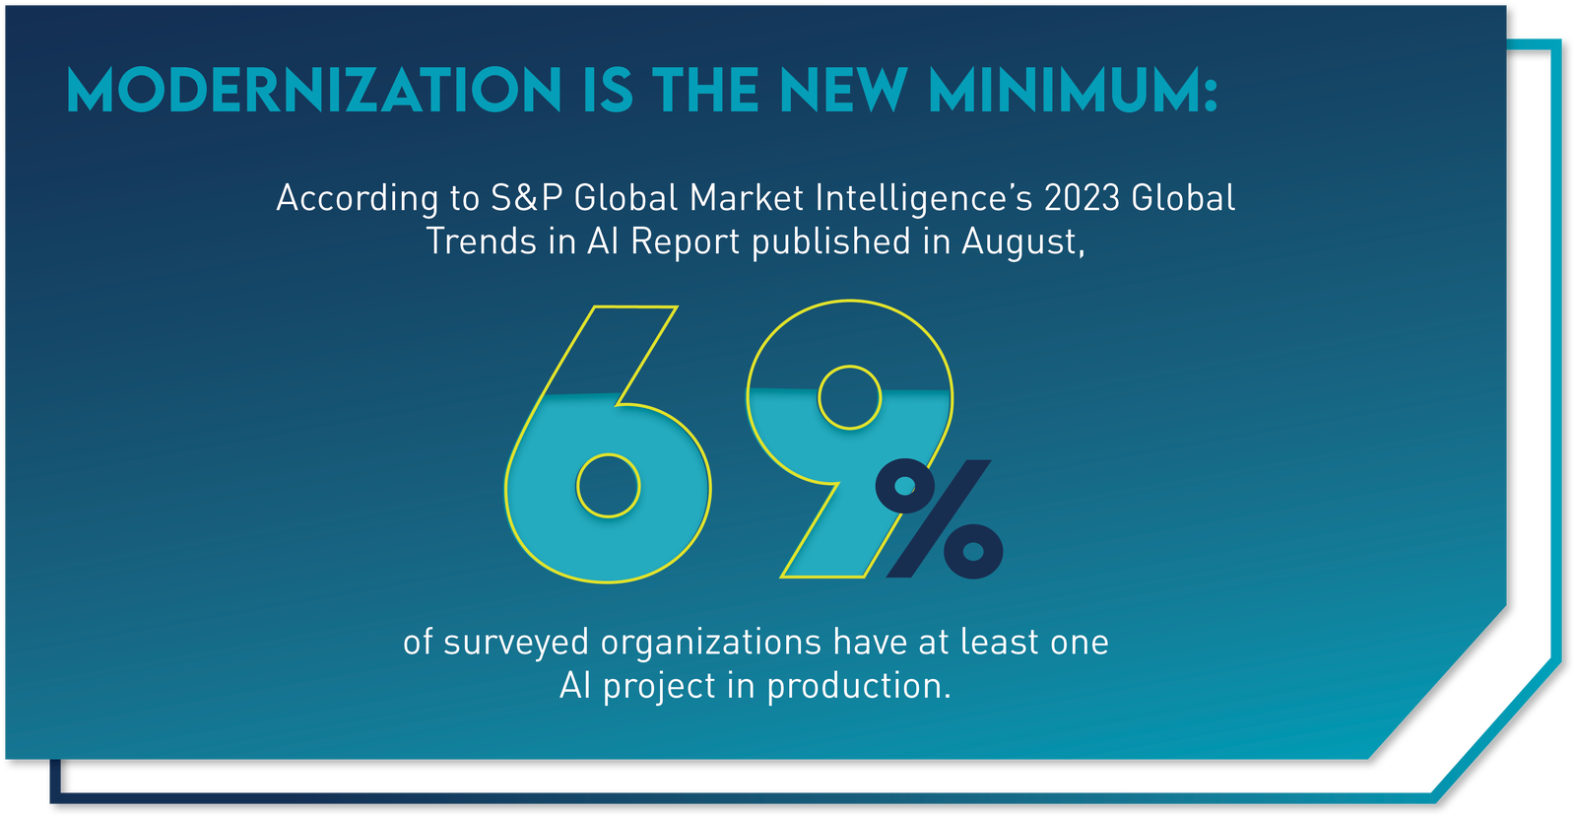 Graphic with text that says: "Modernization is the new minimum: According to S&P Global Market Intelligence's 2023 Global Trends in AI Report published in August, 69% of surveyed organizations have at least one AI project in production."